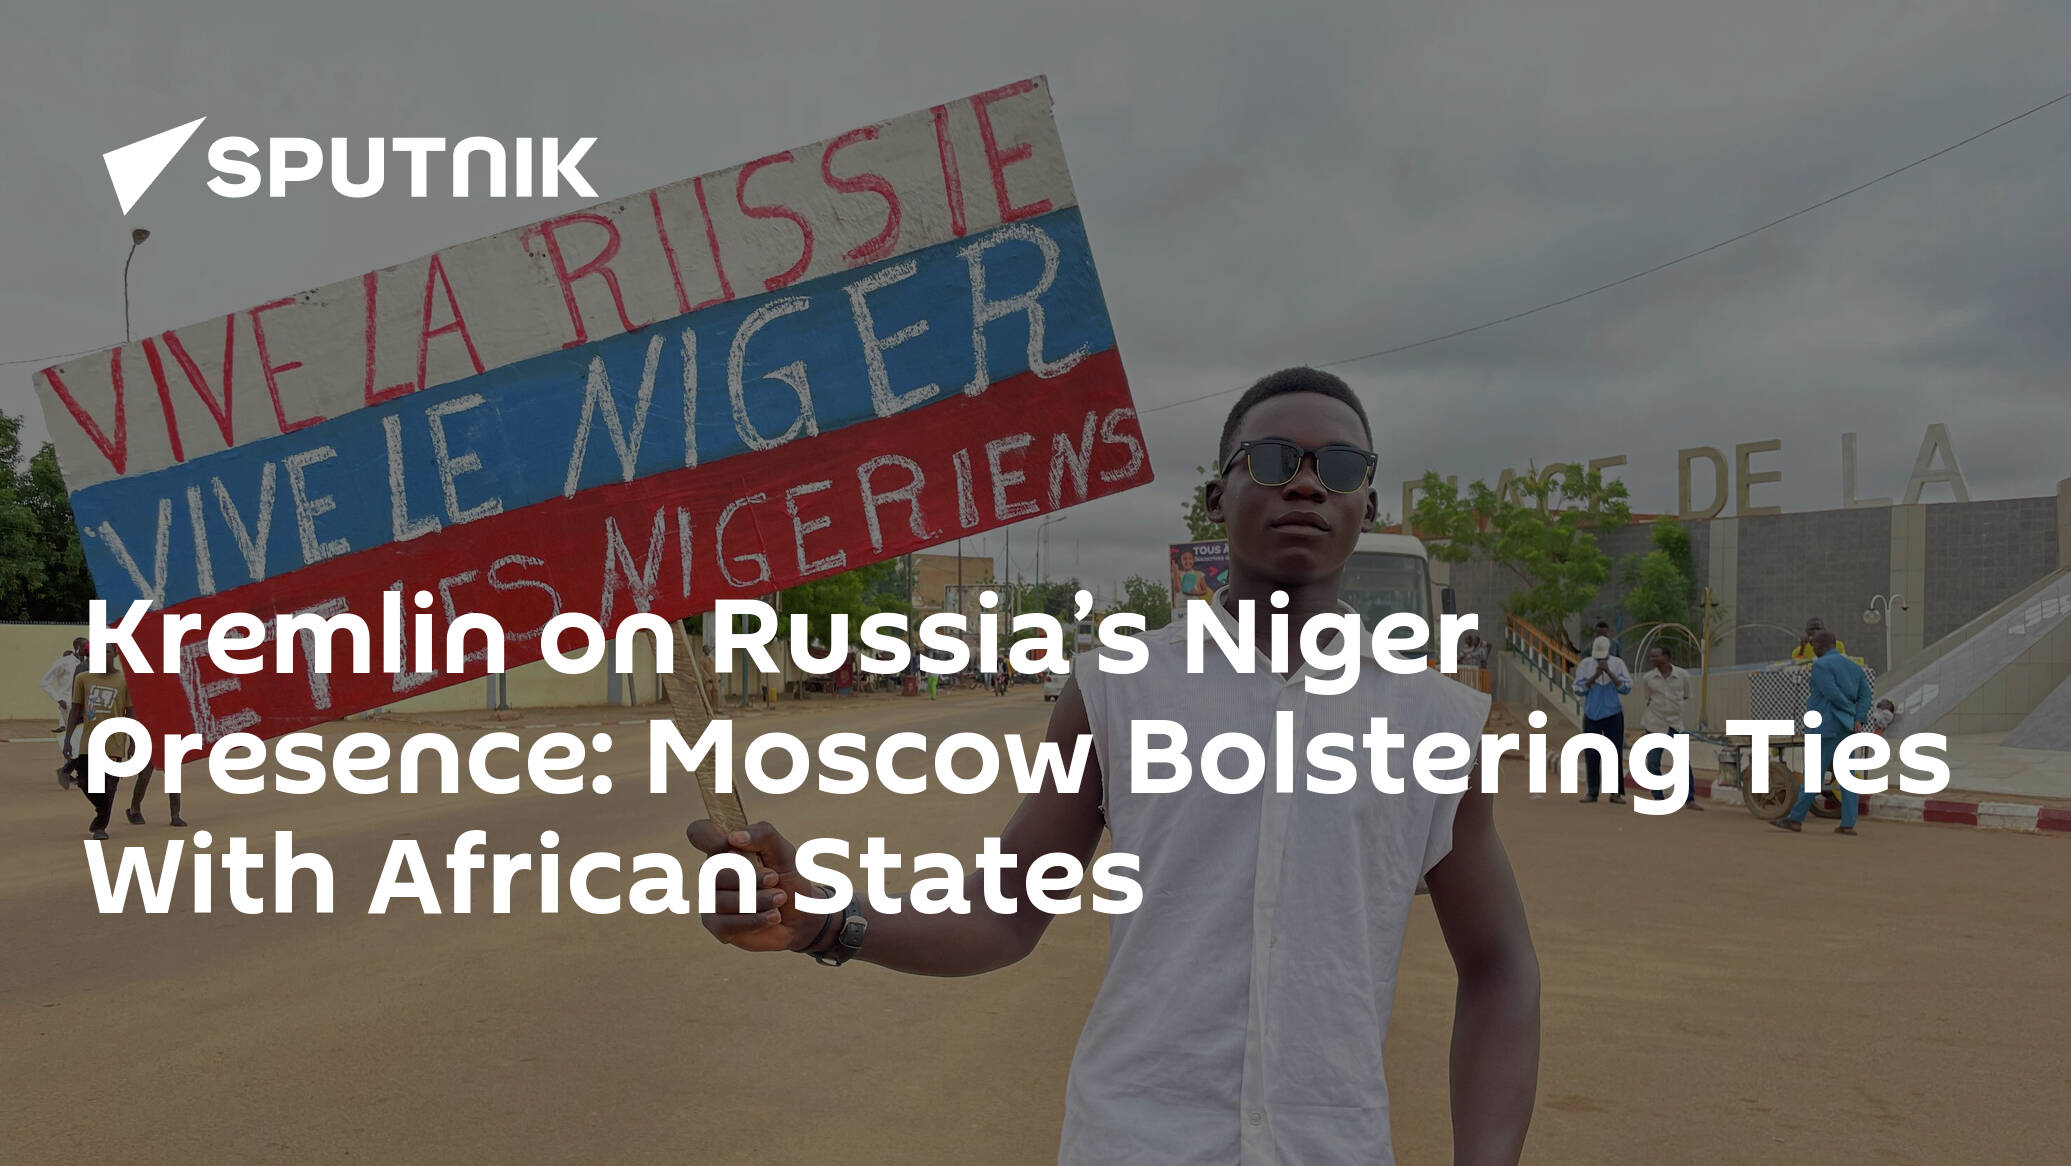 Kremlin on Russia’s Niger Presence: Moscow Bolstering Ties With African States